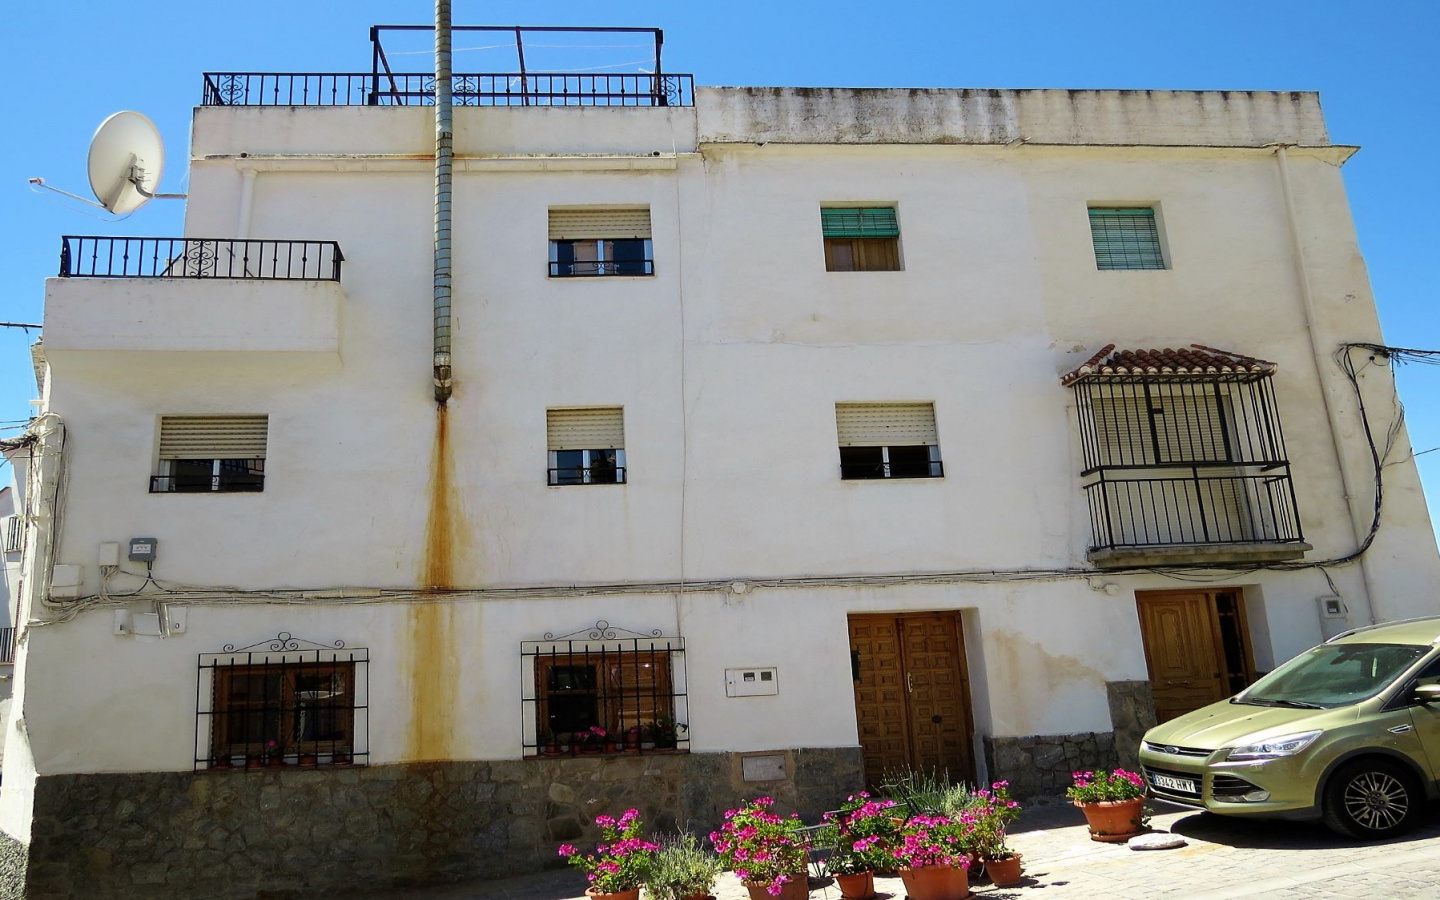 Orgiva. Townhouse, Three double bedrooms, roof terrace and great views